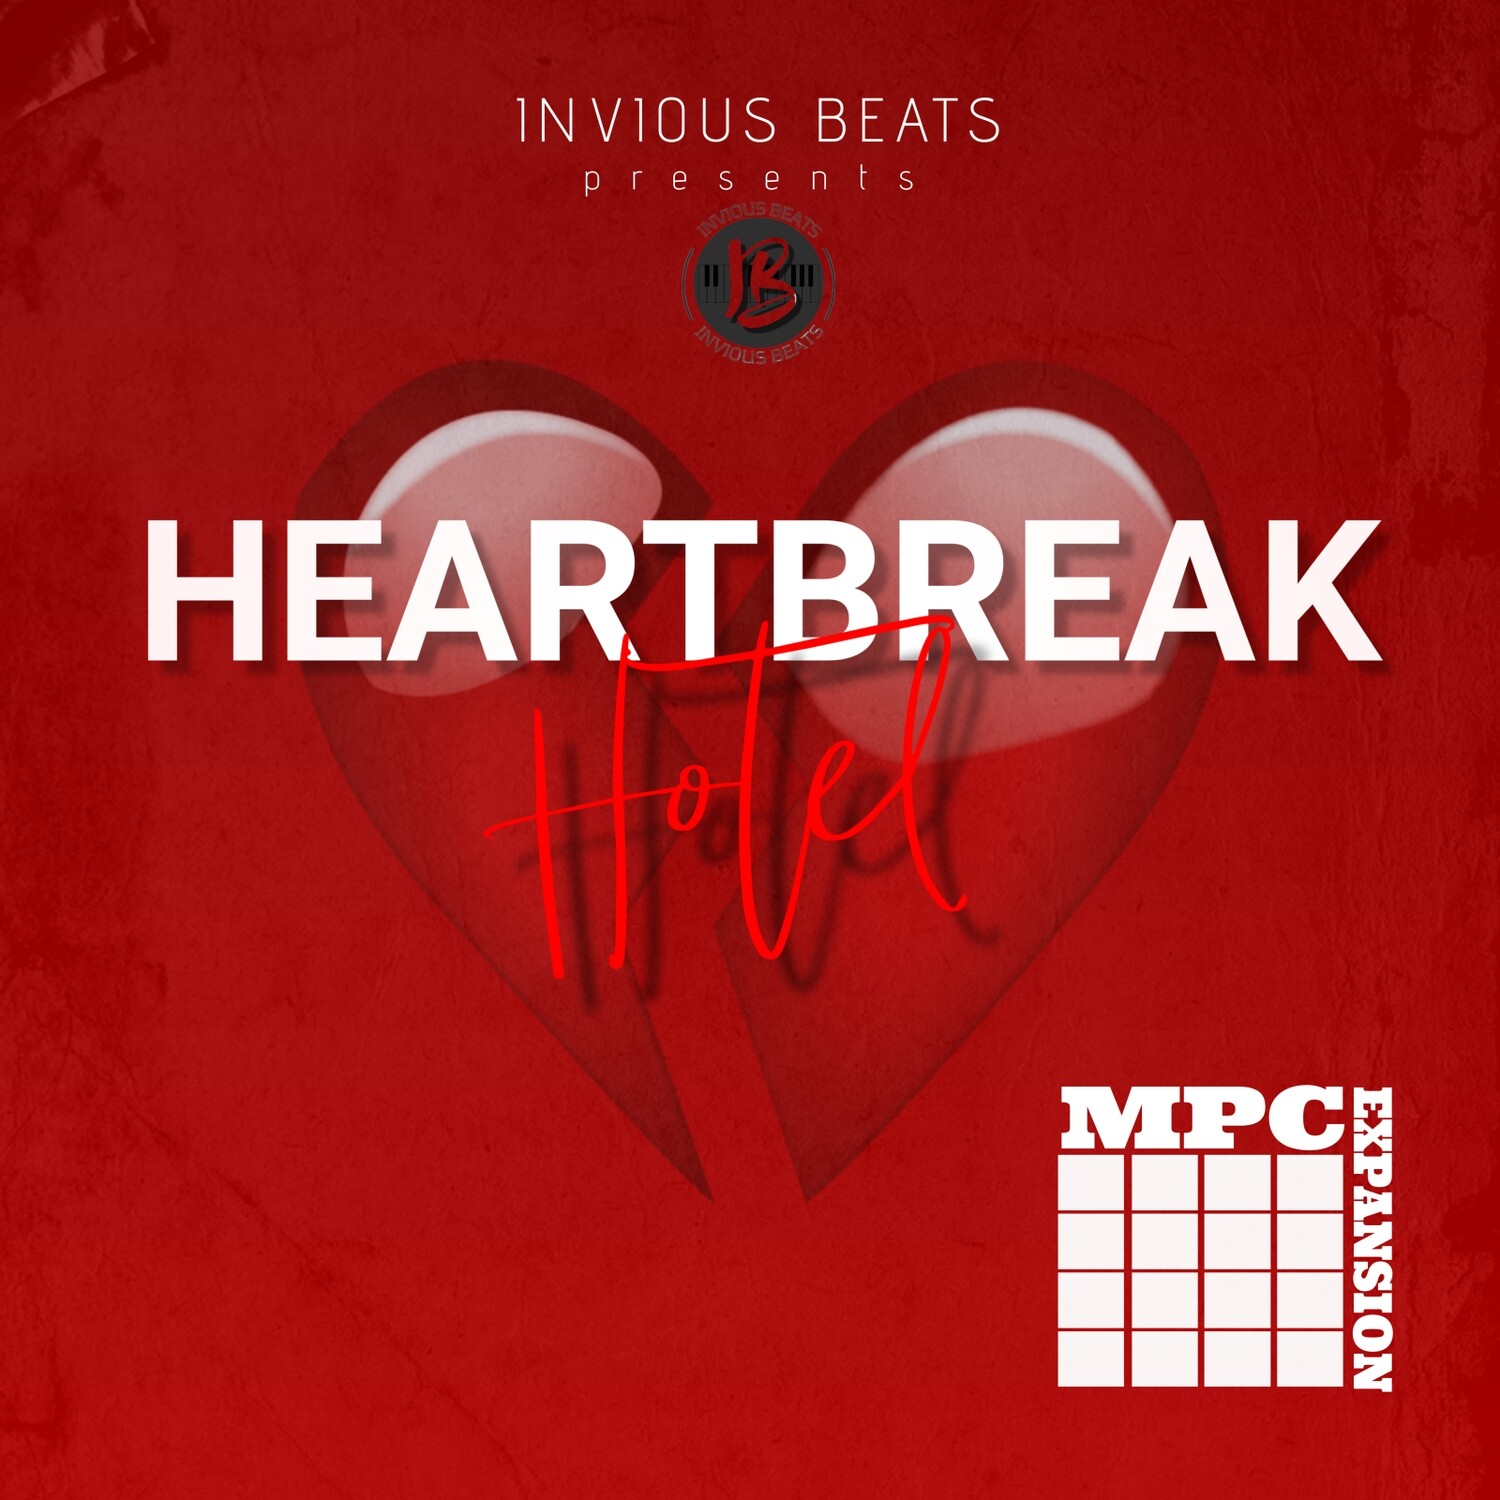 MPC EXPANSION 'HEARTBREAK HOTEL' by INVIOUS